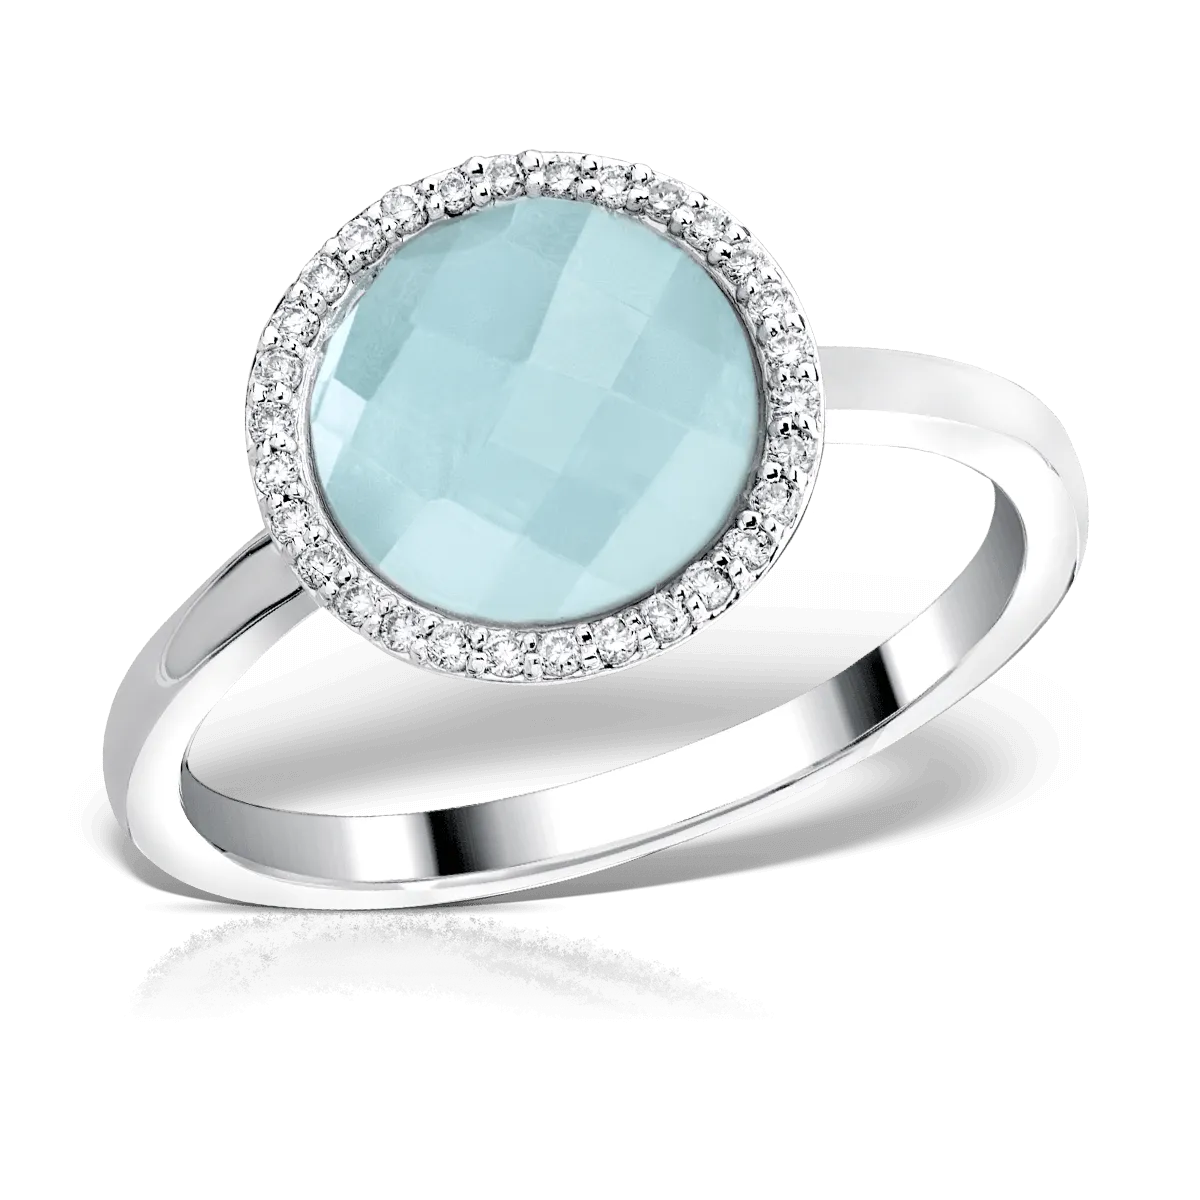 18K white gold ring with 3.52ct light blue topaz and 0.112ct diamonds